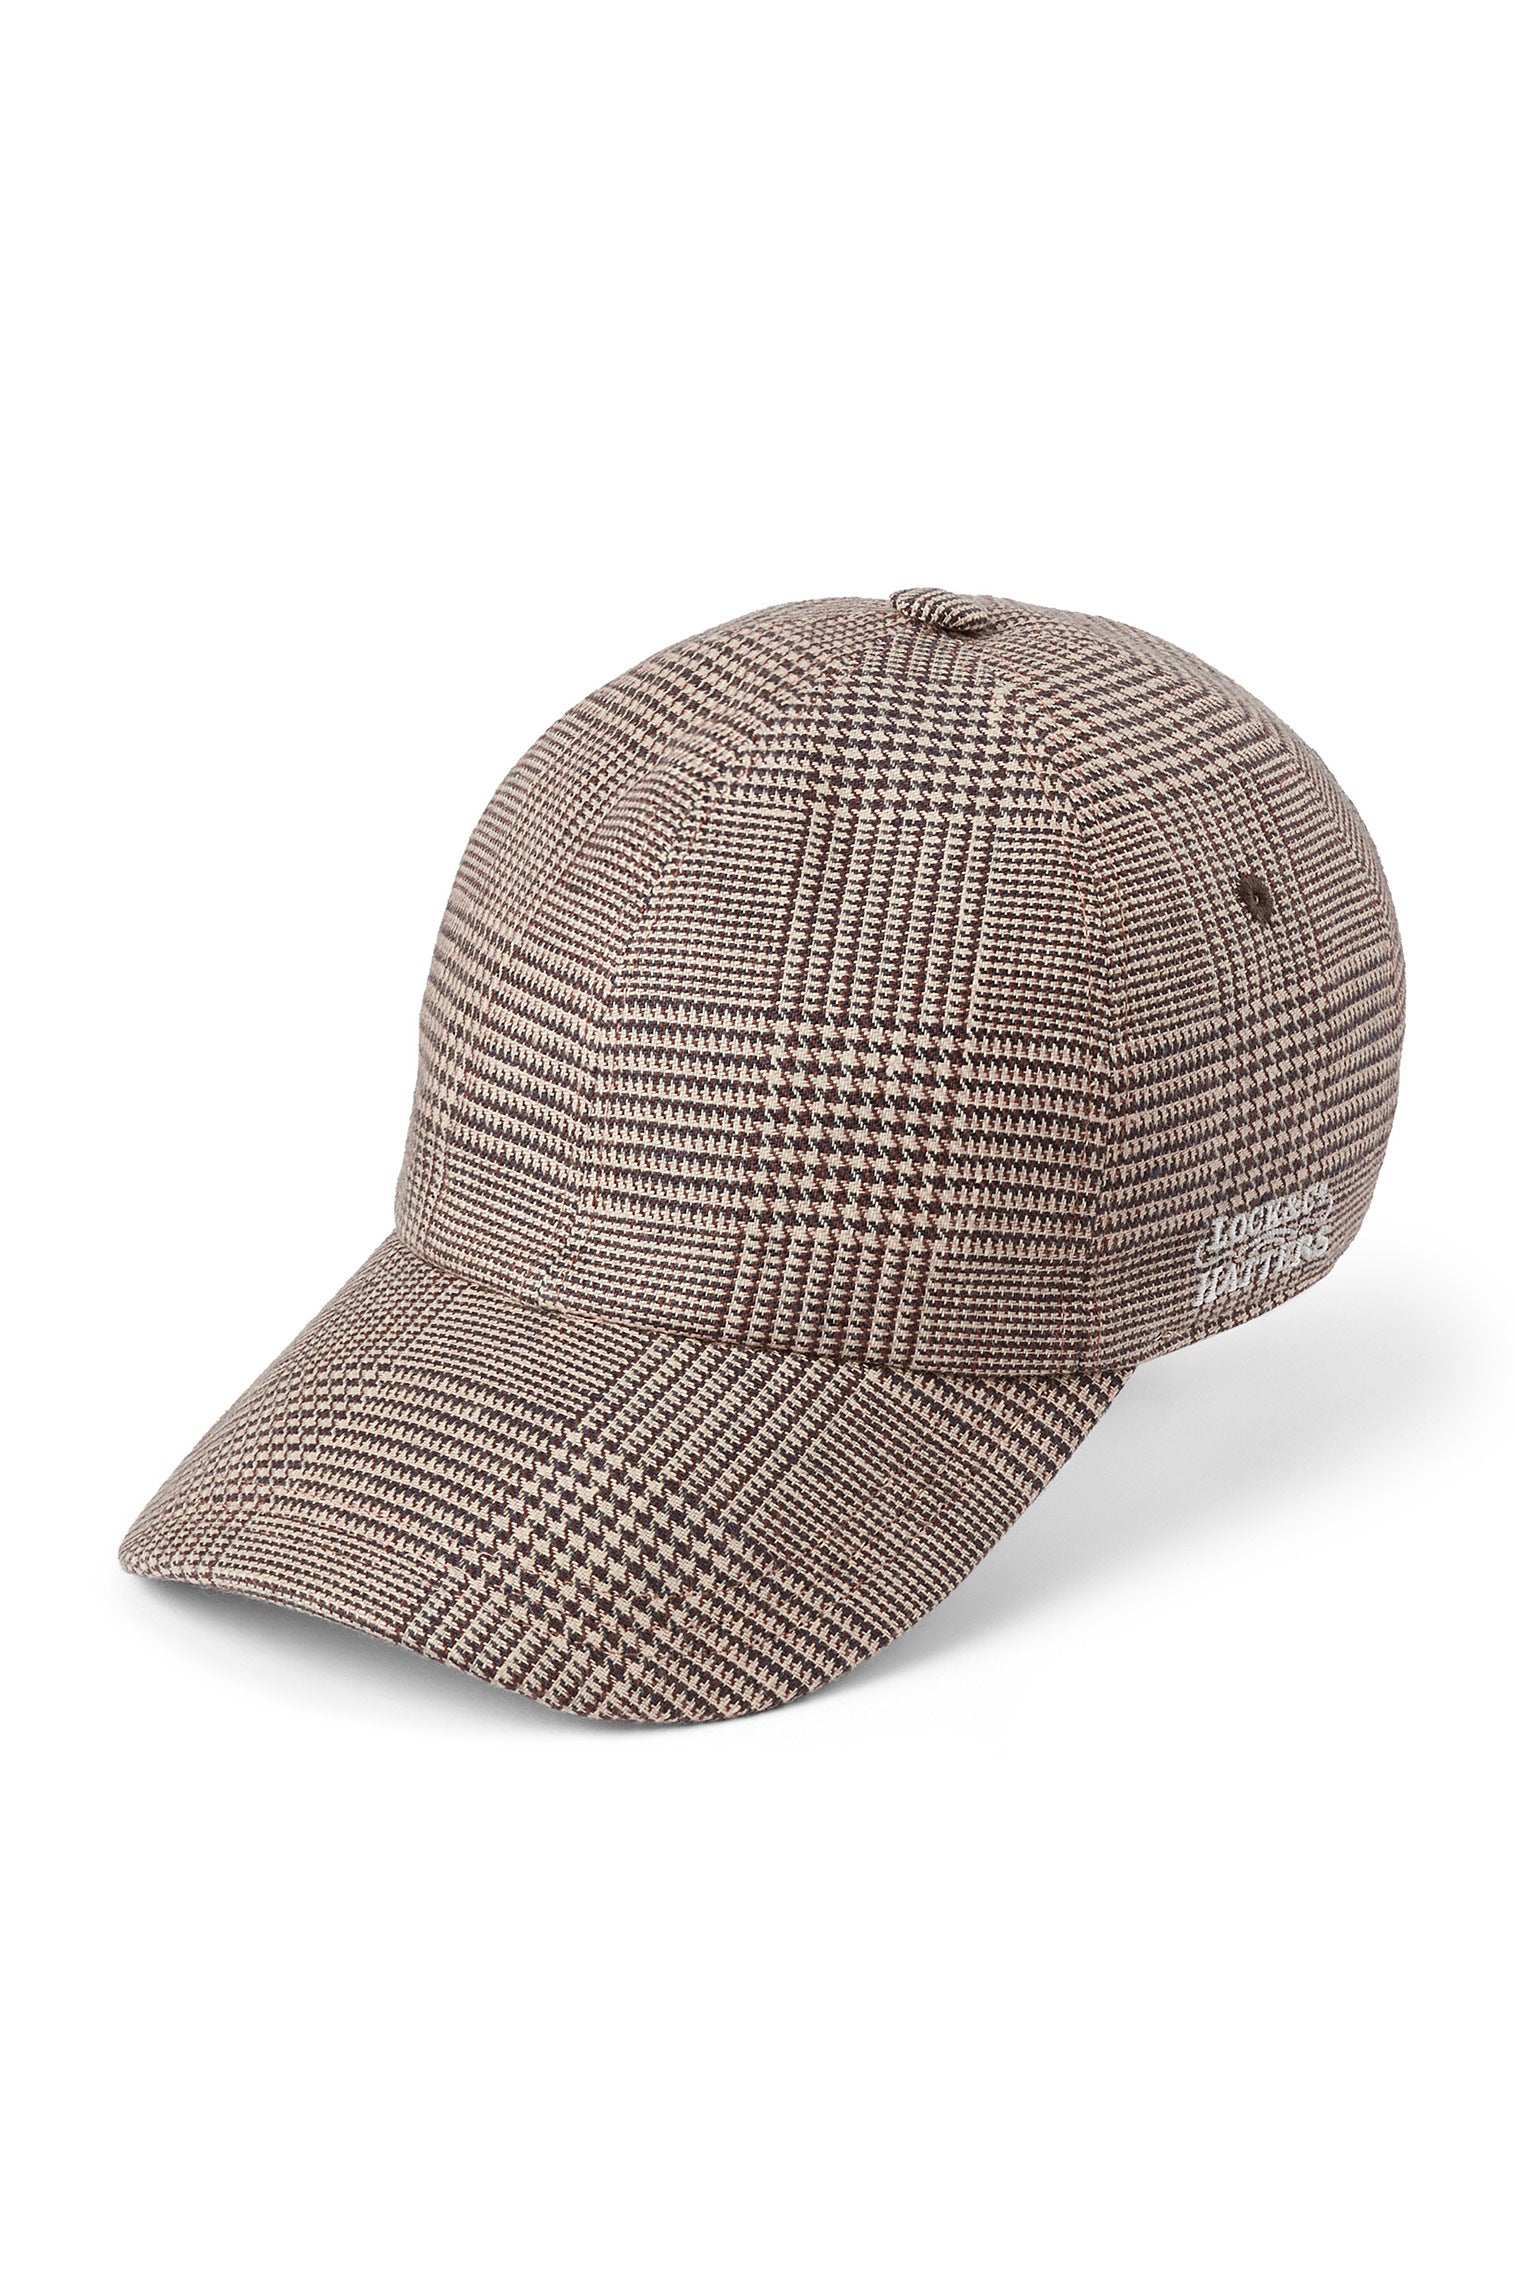 Adjustable Check Baseball Cap - Products - Lock & Co. Hatters London UK